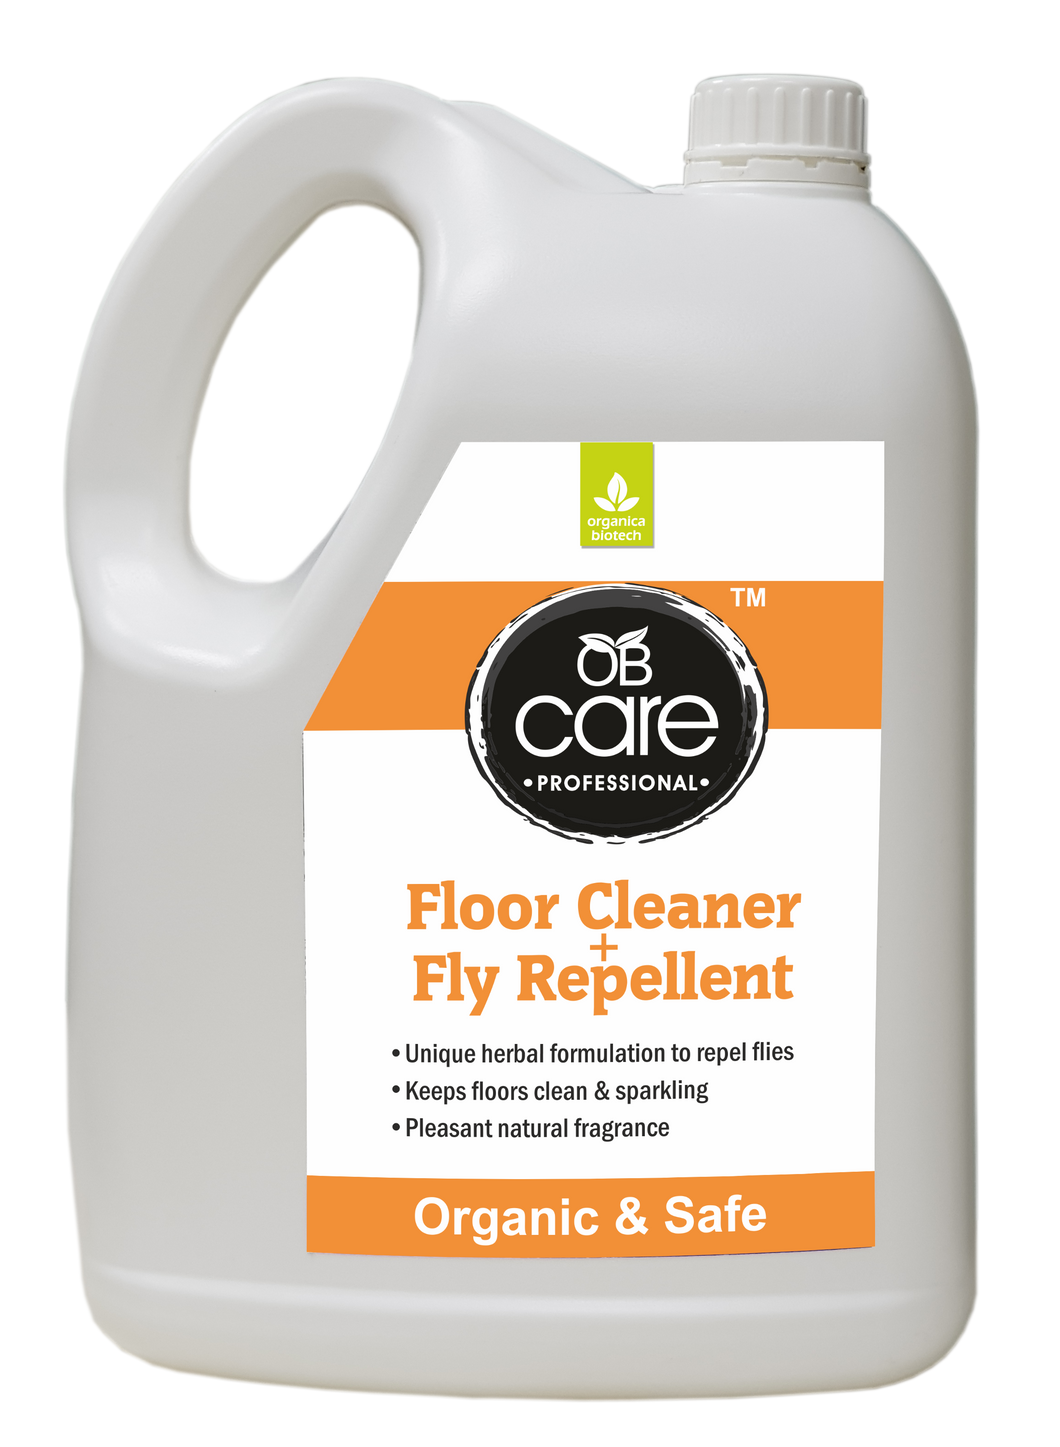 OB Care Floor Cleaner + Fly Repellent Concentrated 1L/5L